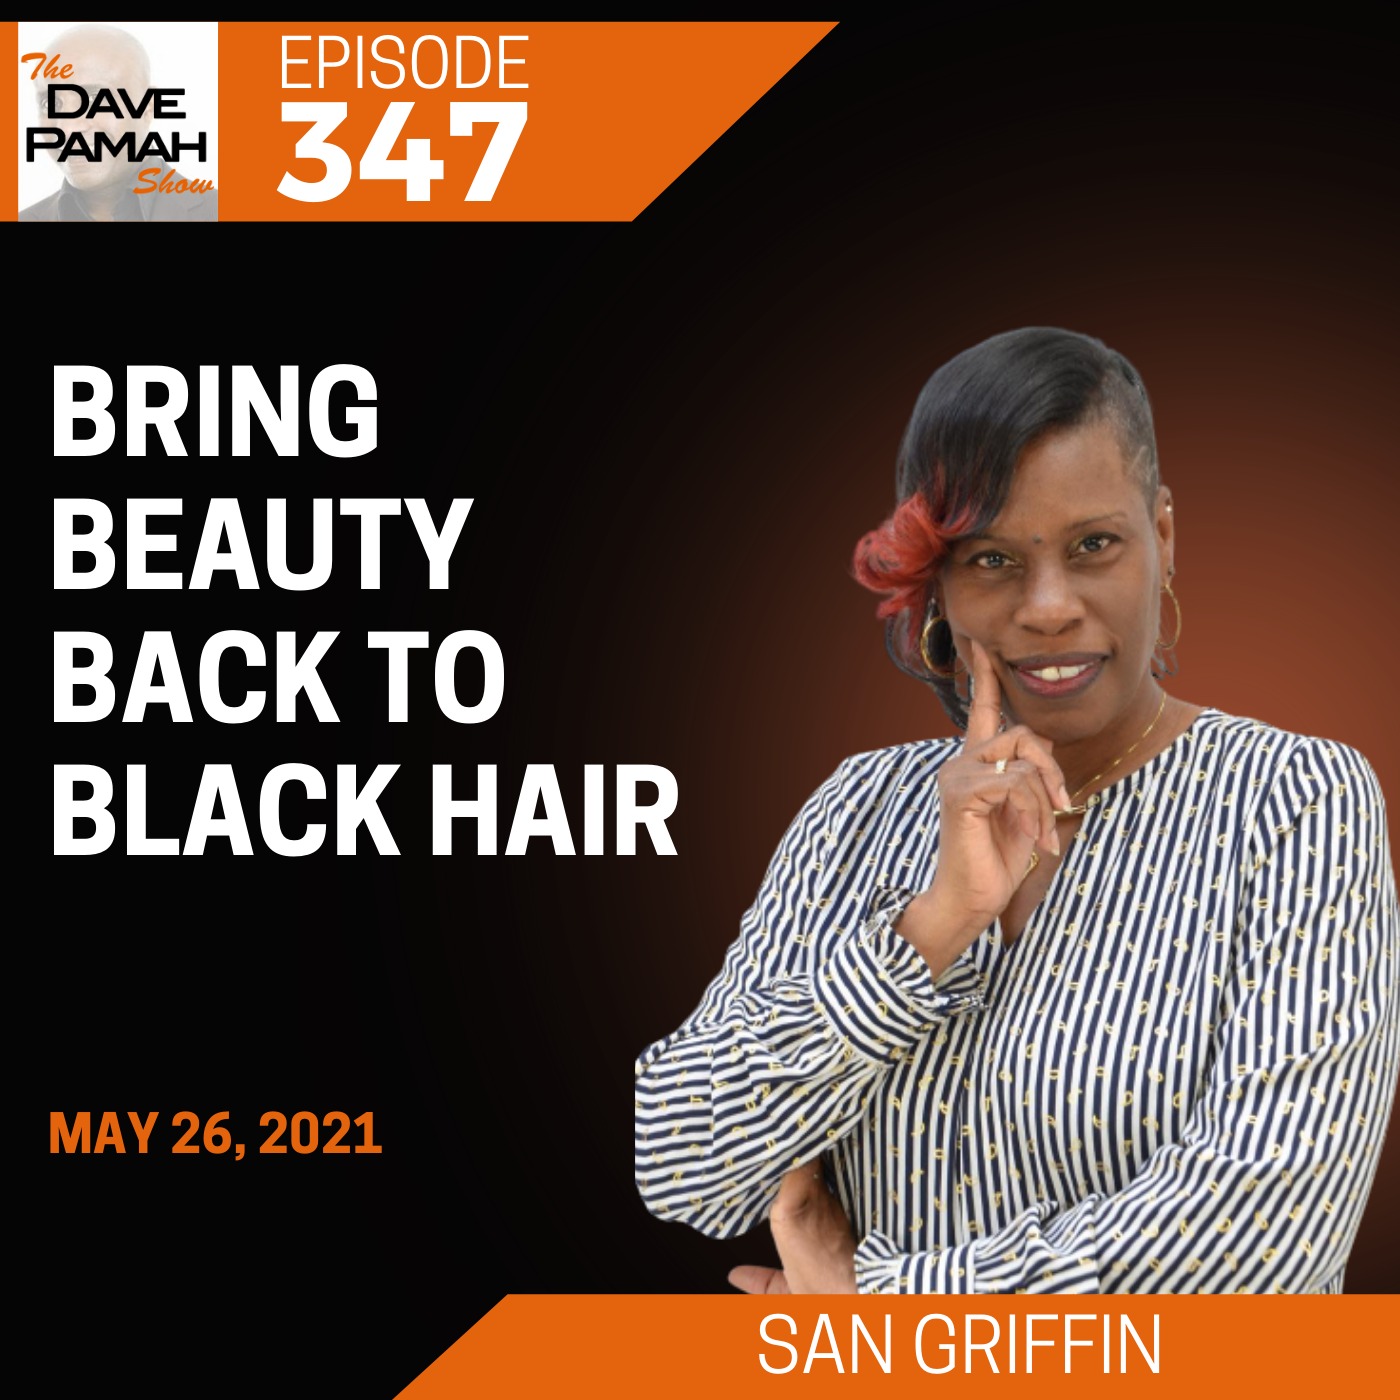 Bring Beauty Back to Black Hair with Children's Book Author San Griffin